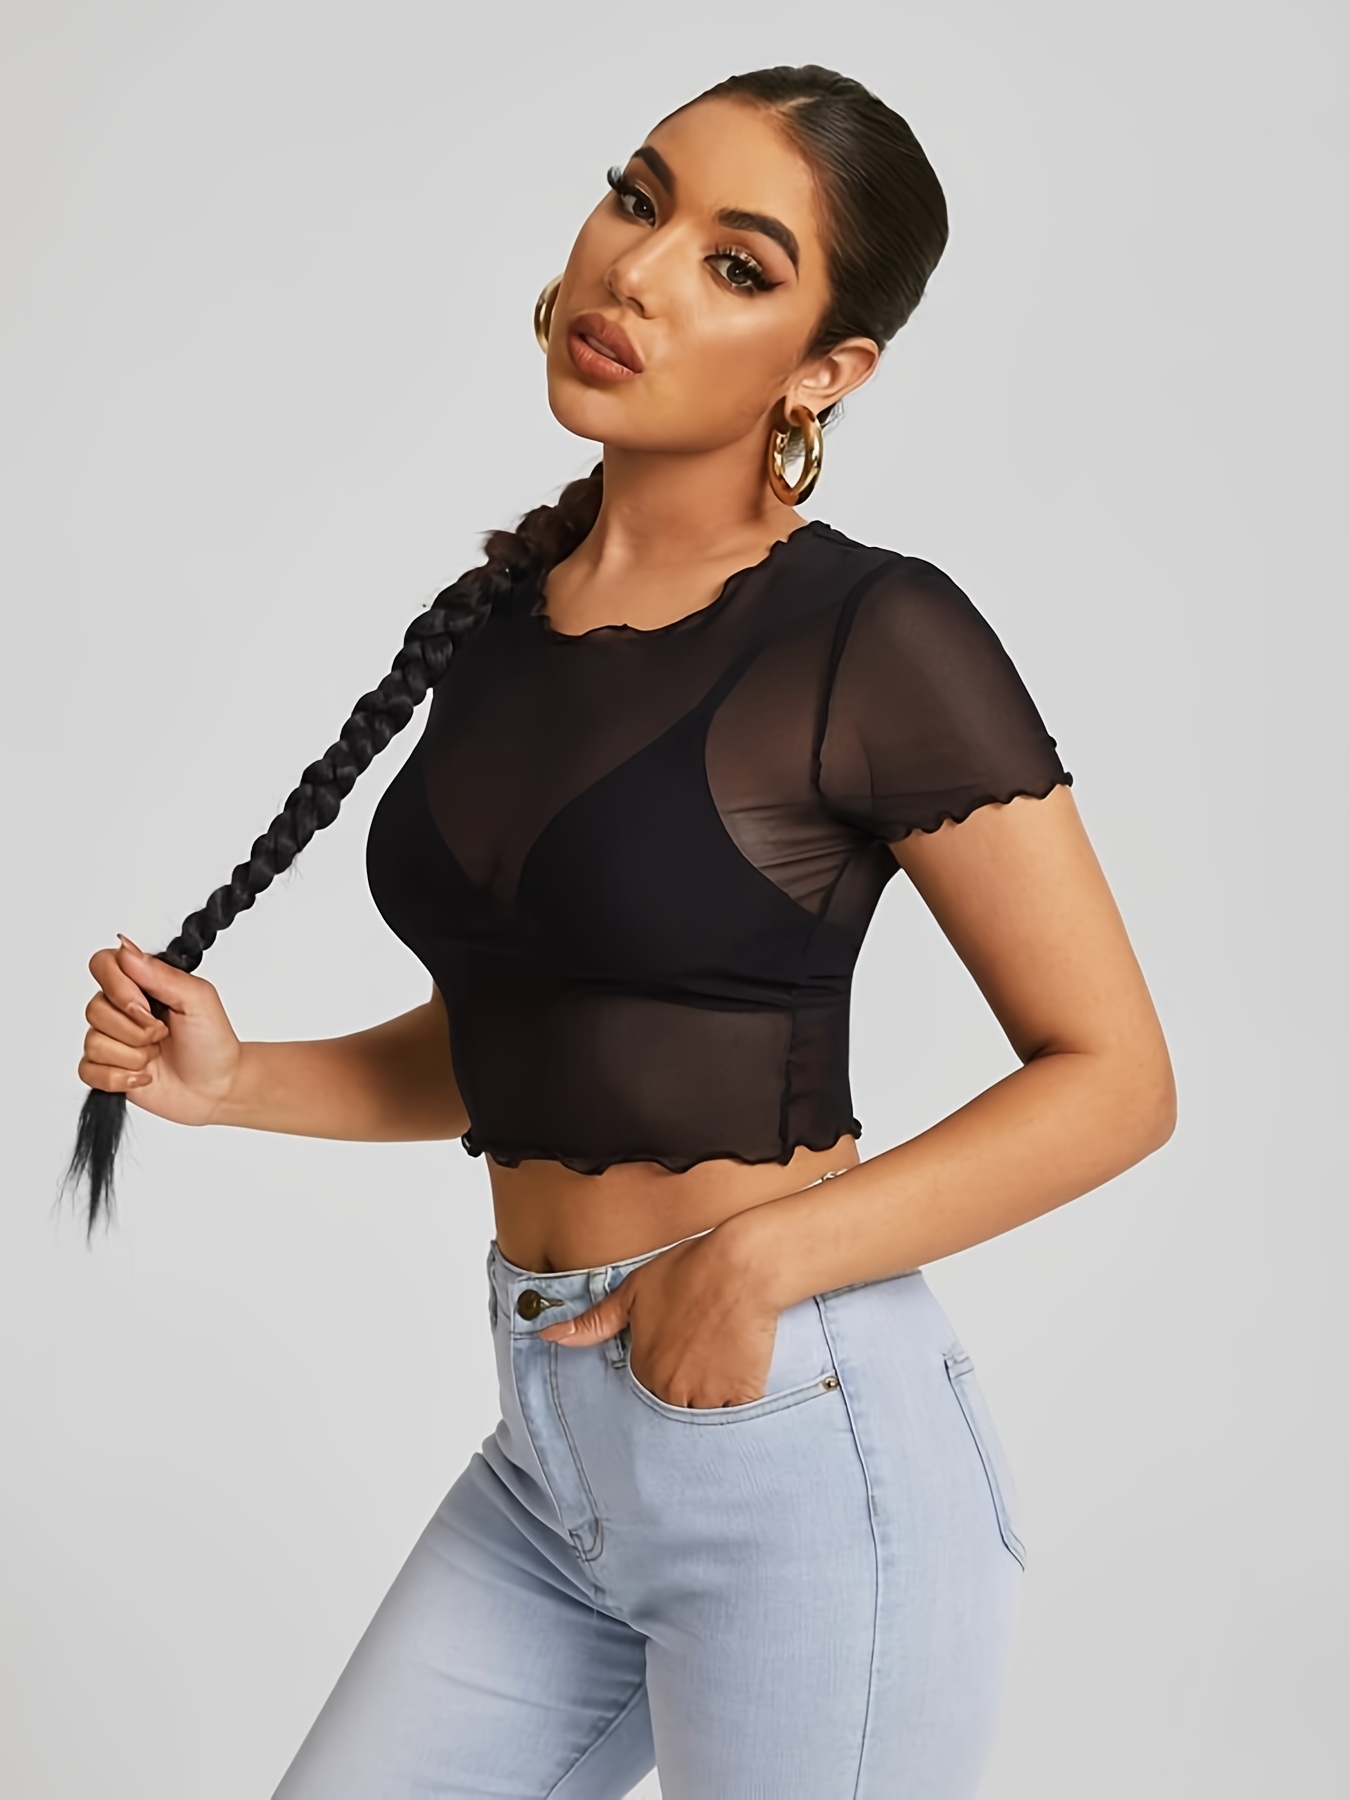 Sheer Mesh Sexy Crop Top Without Bra, Short Sleeve Casual Every Day Top For  Summer, Women's Clothing